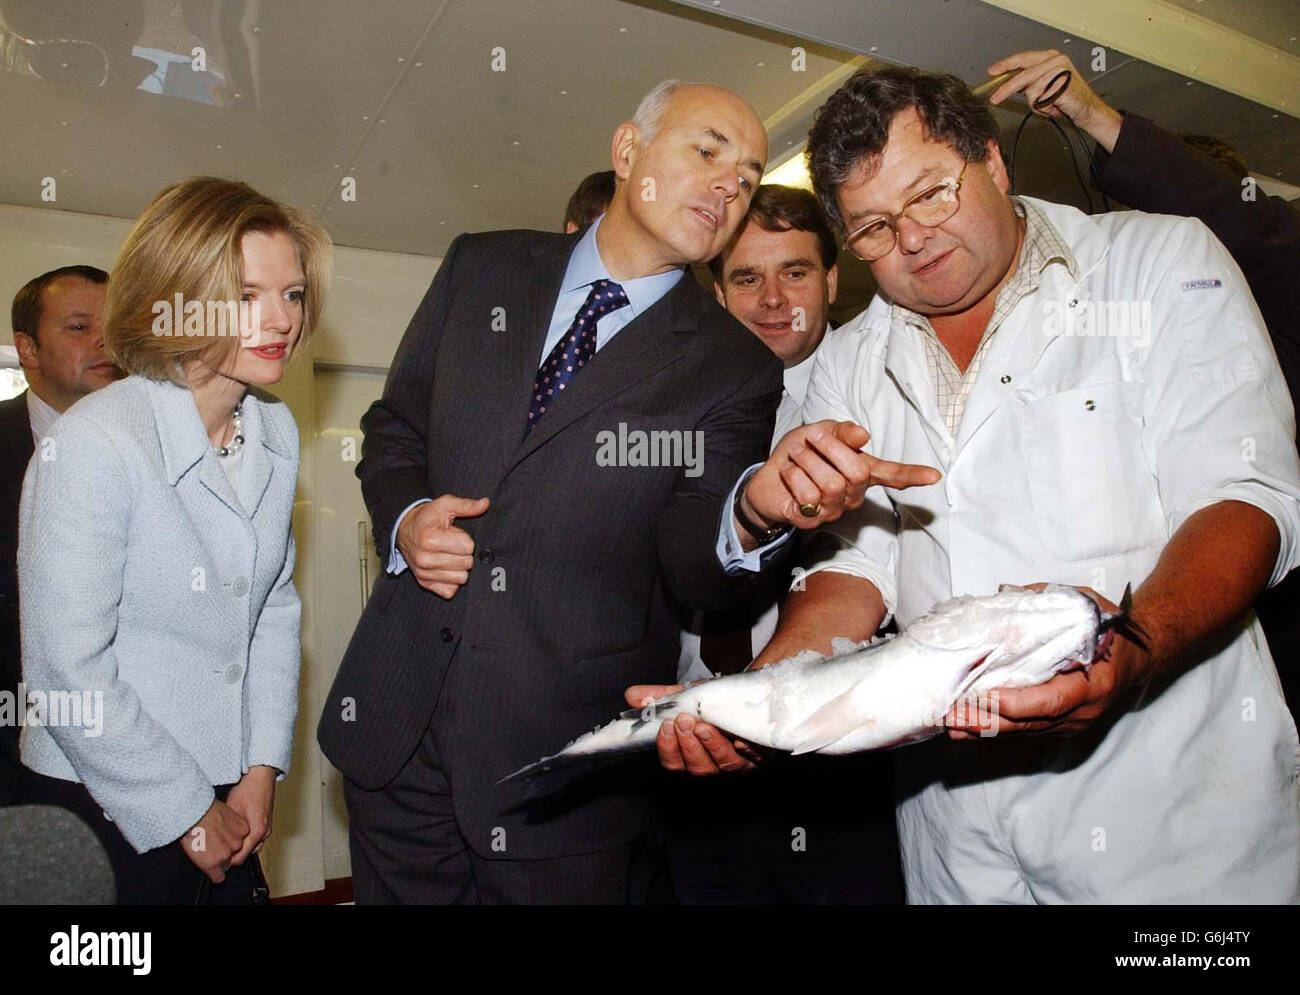 Conservative Party Leader Iain Duncan Smith (centre) and his wife Betsy, talk to Nick Bozman during a visit to the fish market in Looe, Cornwall. The Conservative Leader was in the south west, where he was visiting fishermen in Looe and later touring the Eden Project in St Austell amid continuing controversy over his employment of wife Betsy as an aide, and suspected leadership plotting. Stock Photo